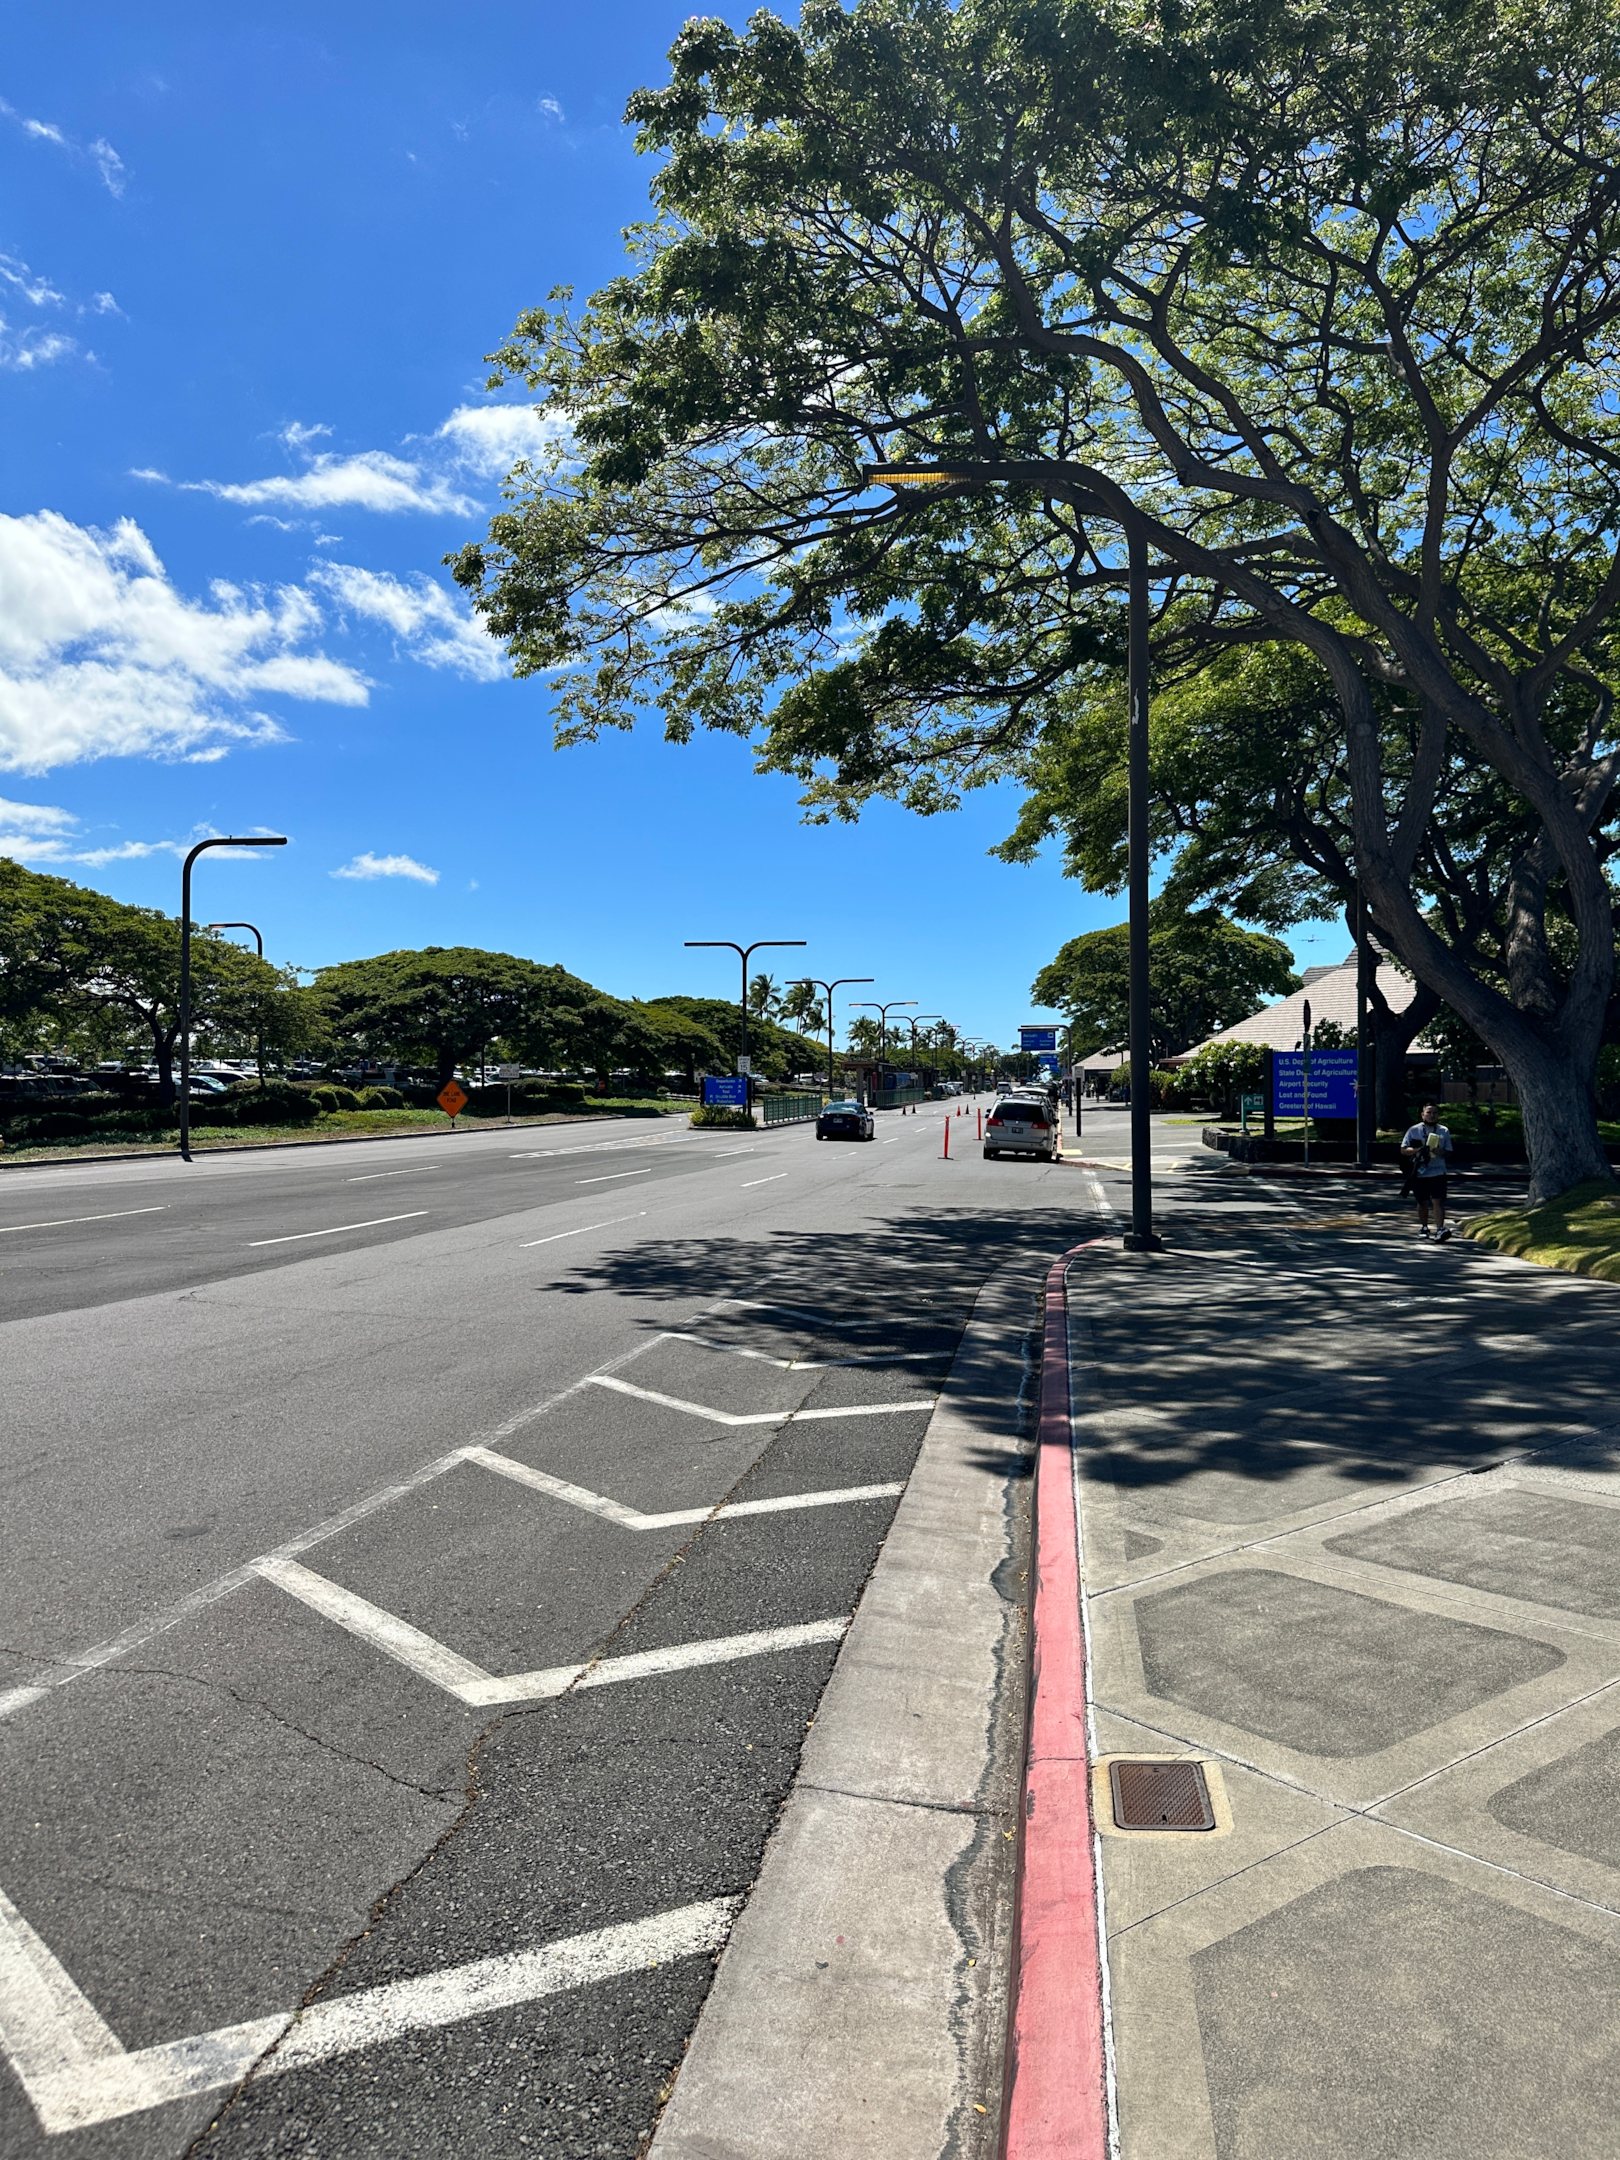 Rideshare and Rental Car pickups at the Kona International Airport are located in the center median.